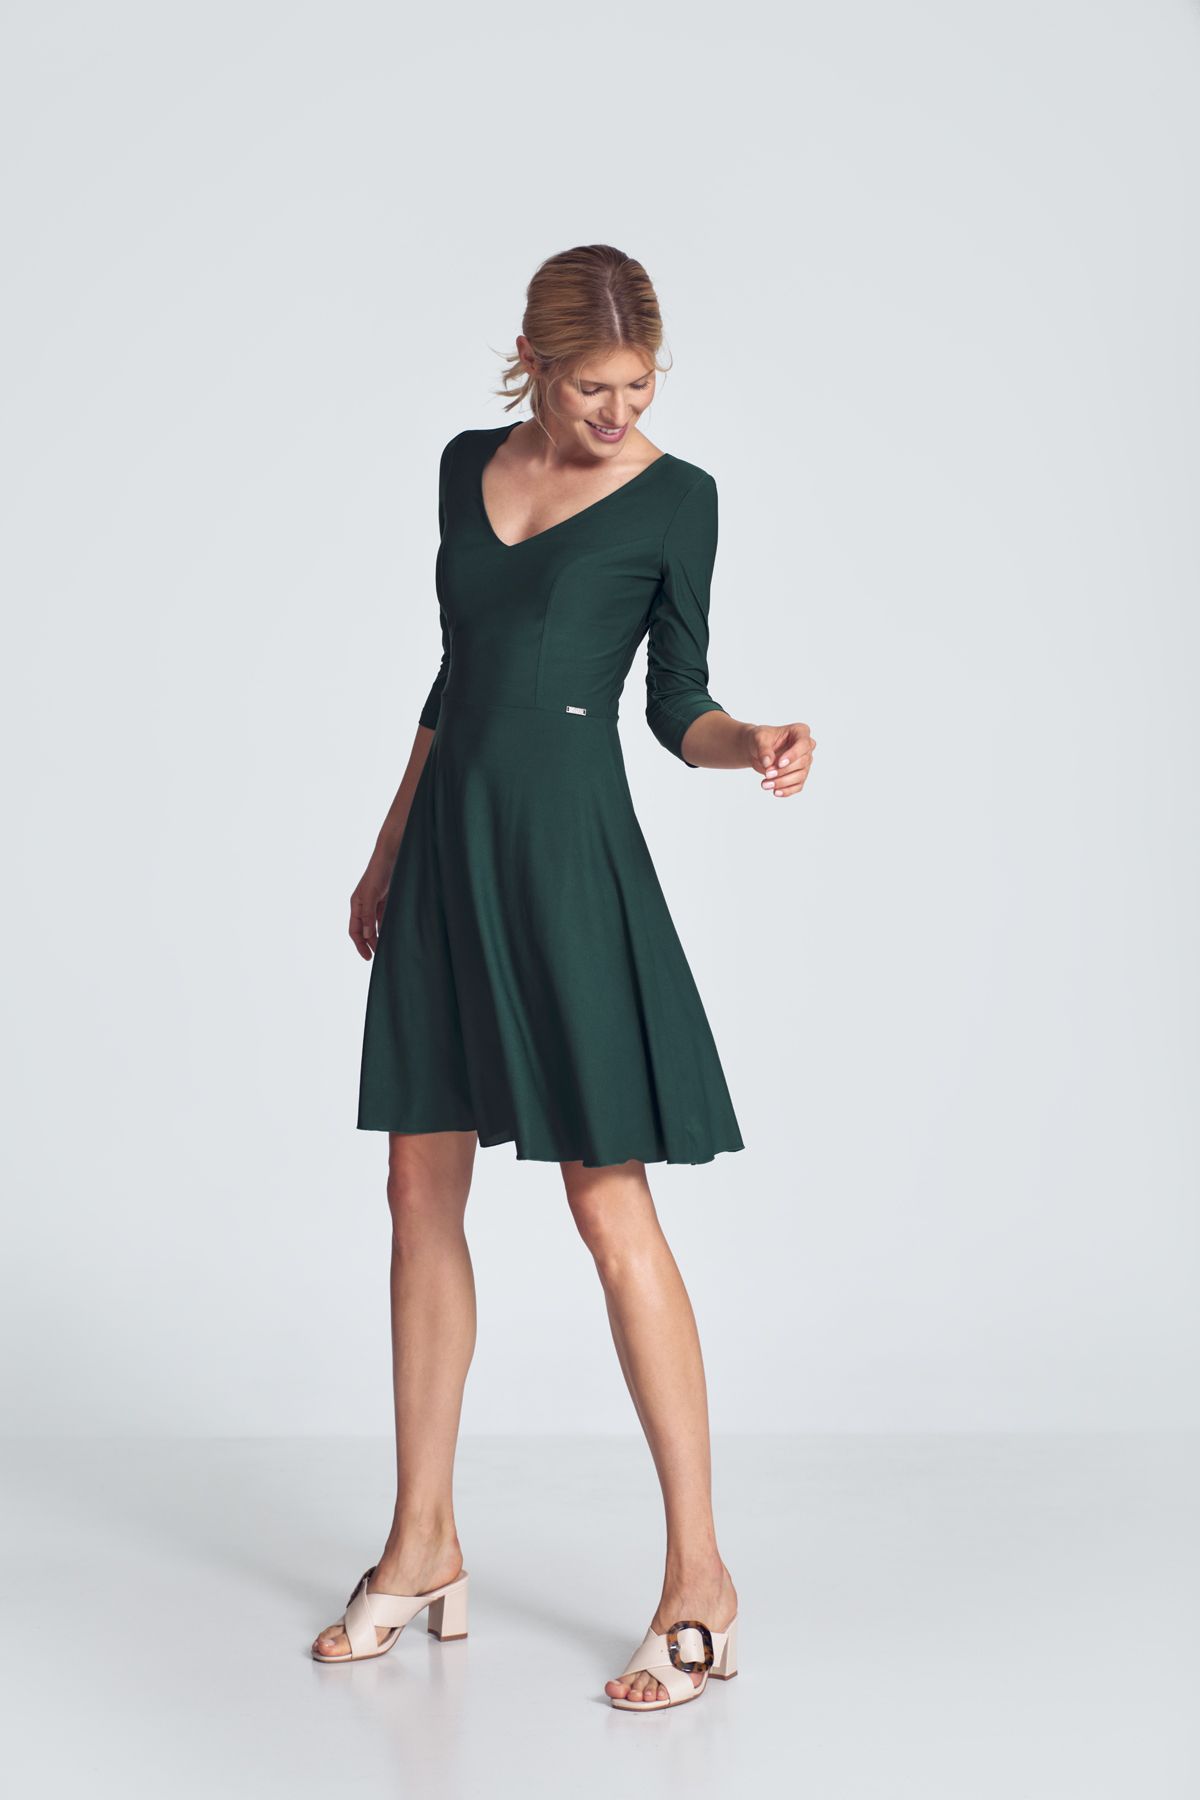 Green cocktail midi dress with a V-neck, ¾ sleeve, pleats at the bust, sewn at the waist, flared hem. Fastened at the back with a covered zipp.